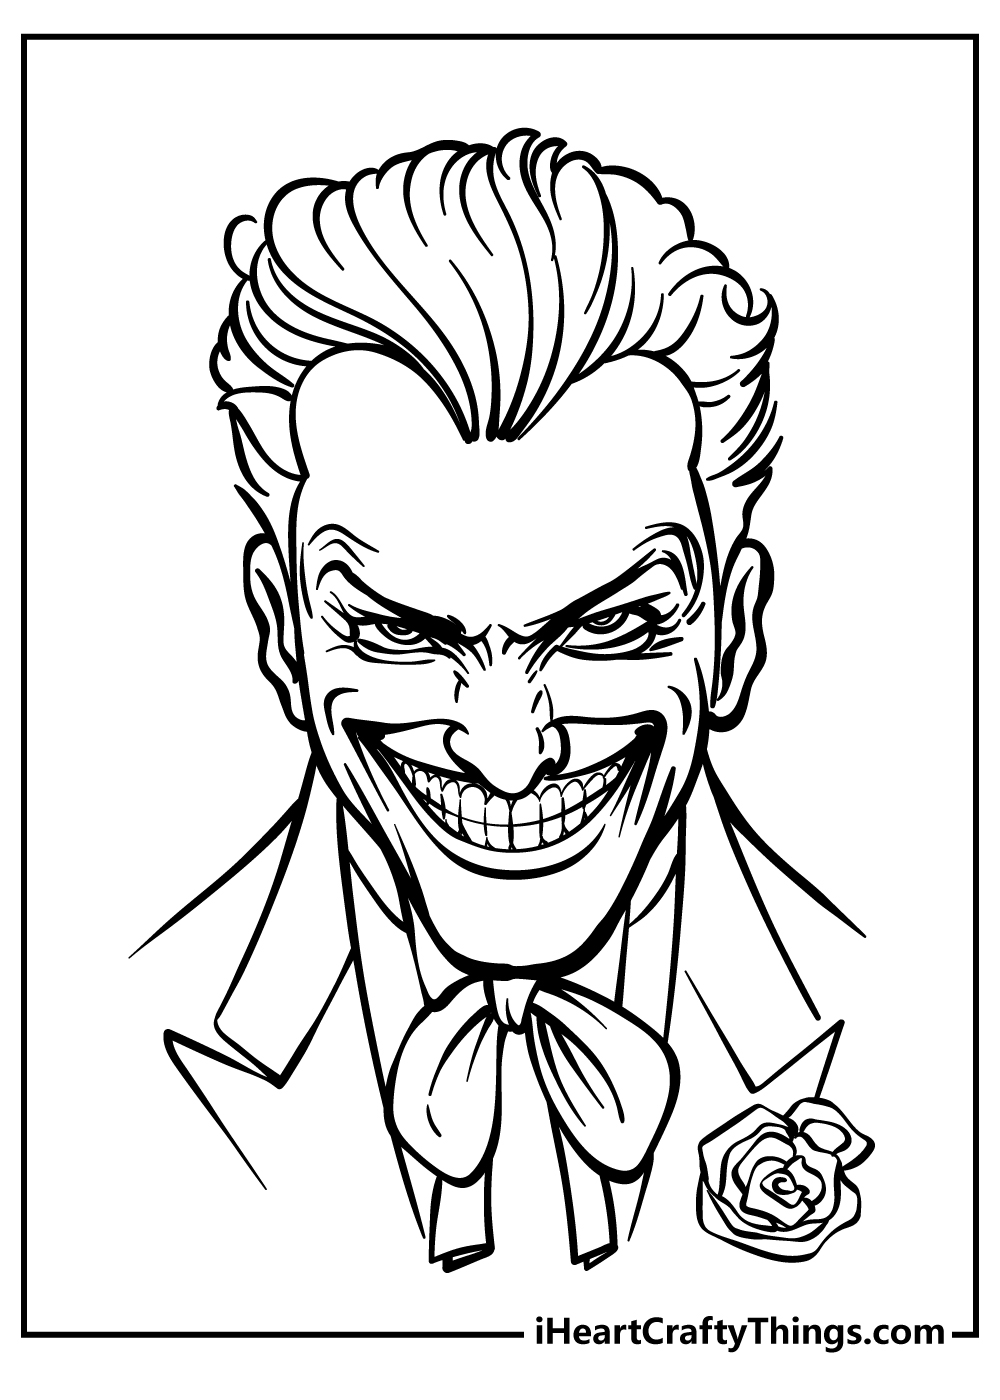 Joker Coloring Pages for preschoolers free printable